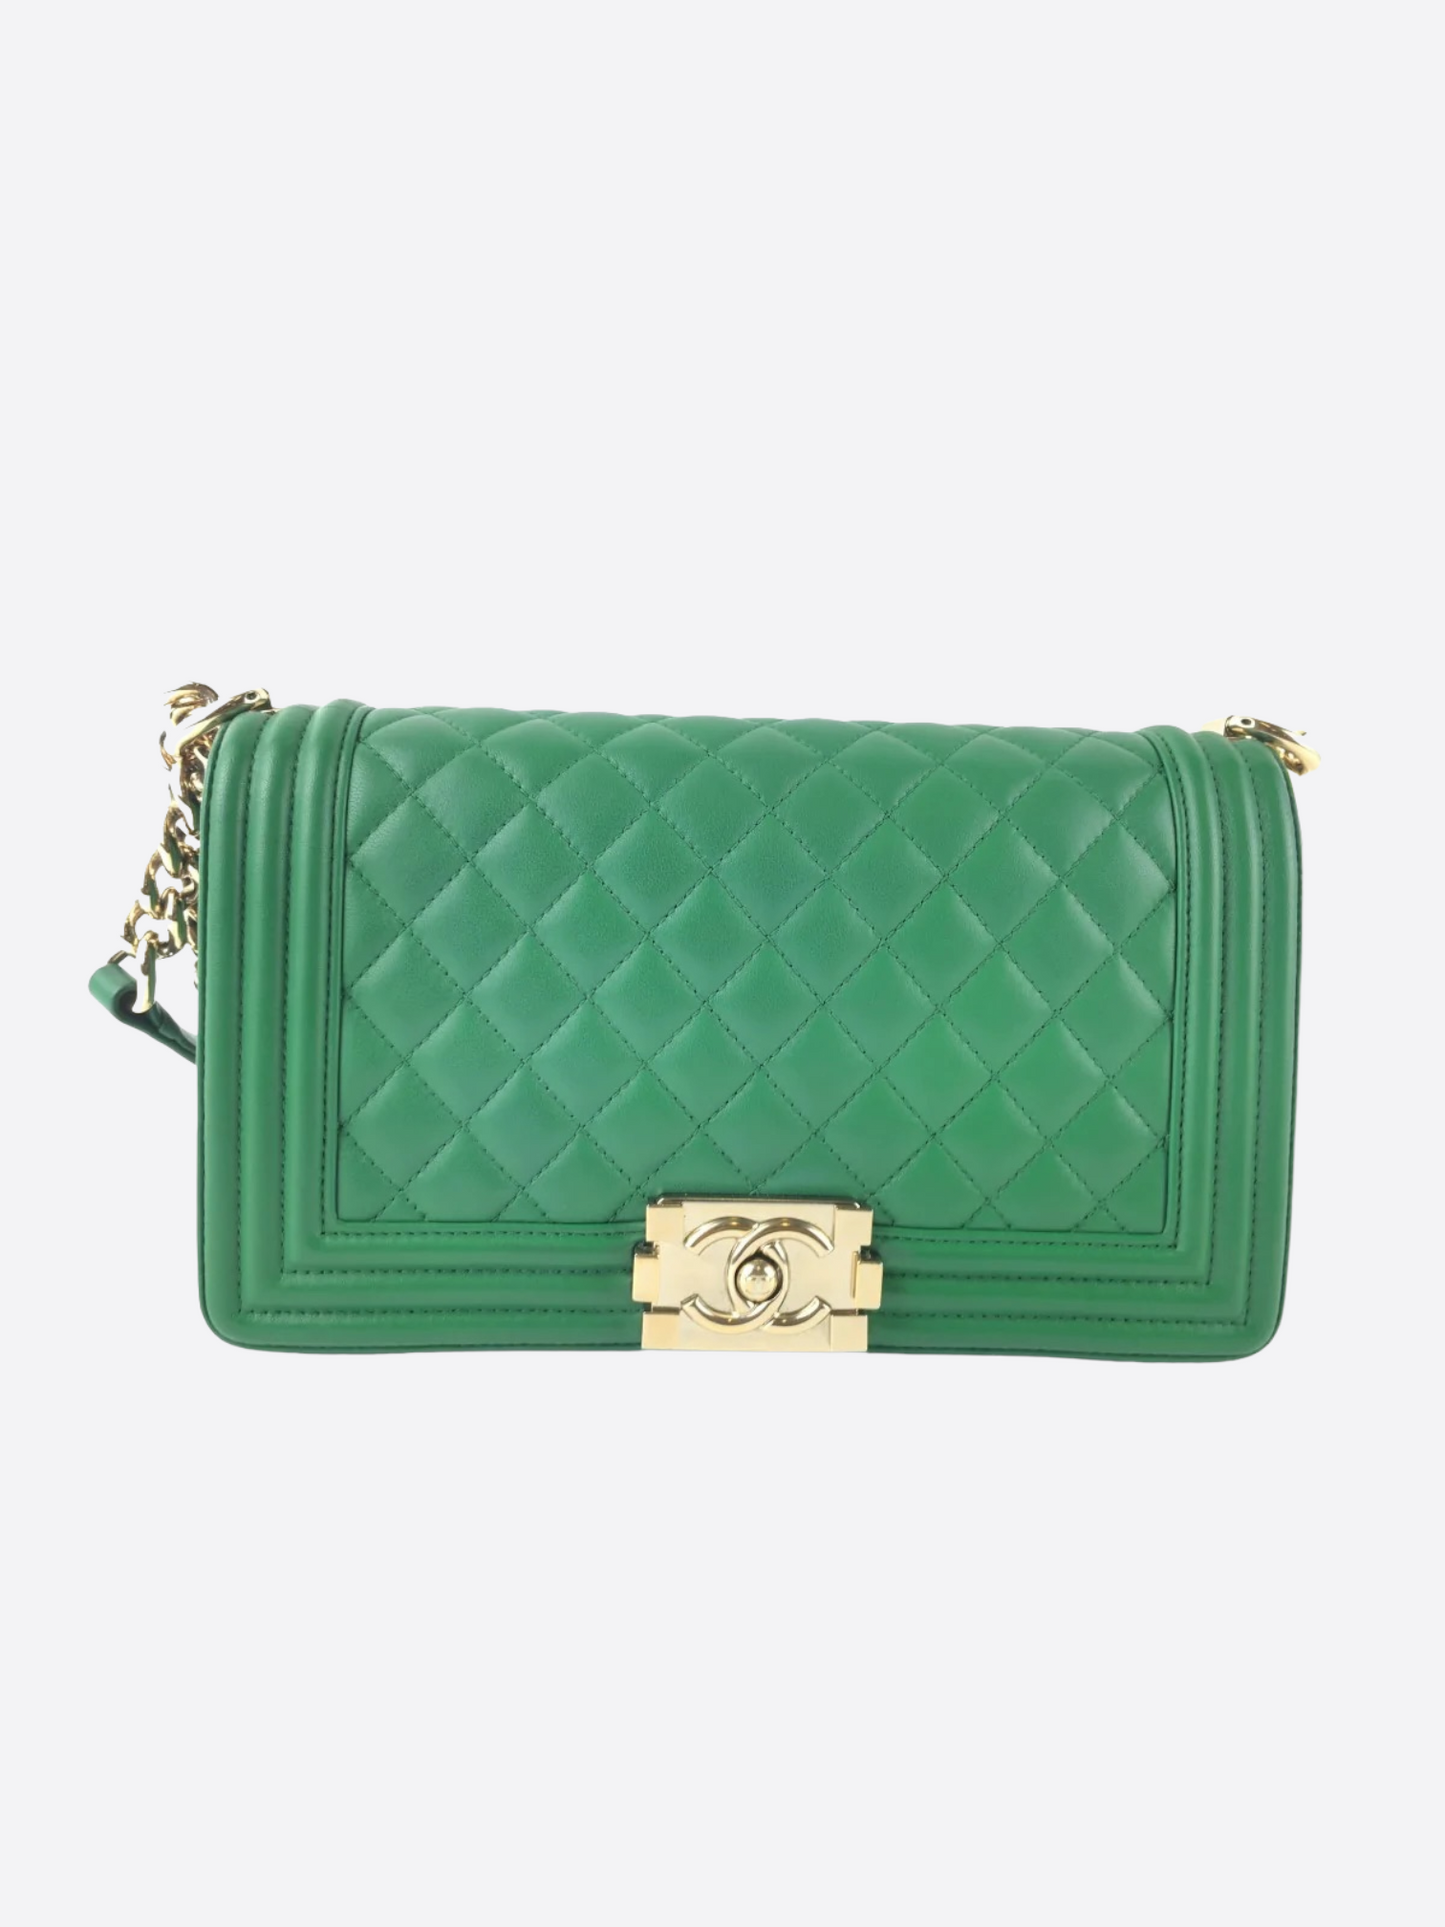 Chanel Boy Flap Bag Quilted Lambskin Old Medium Green 2287385